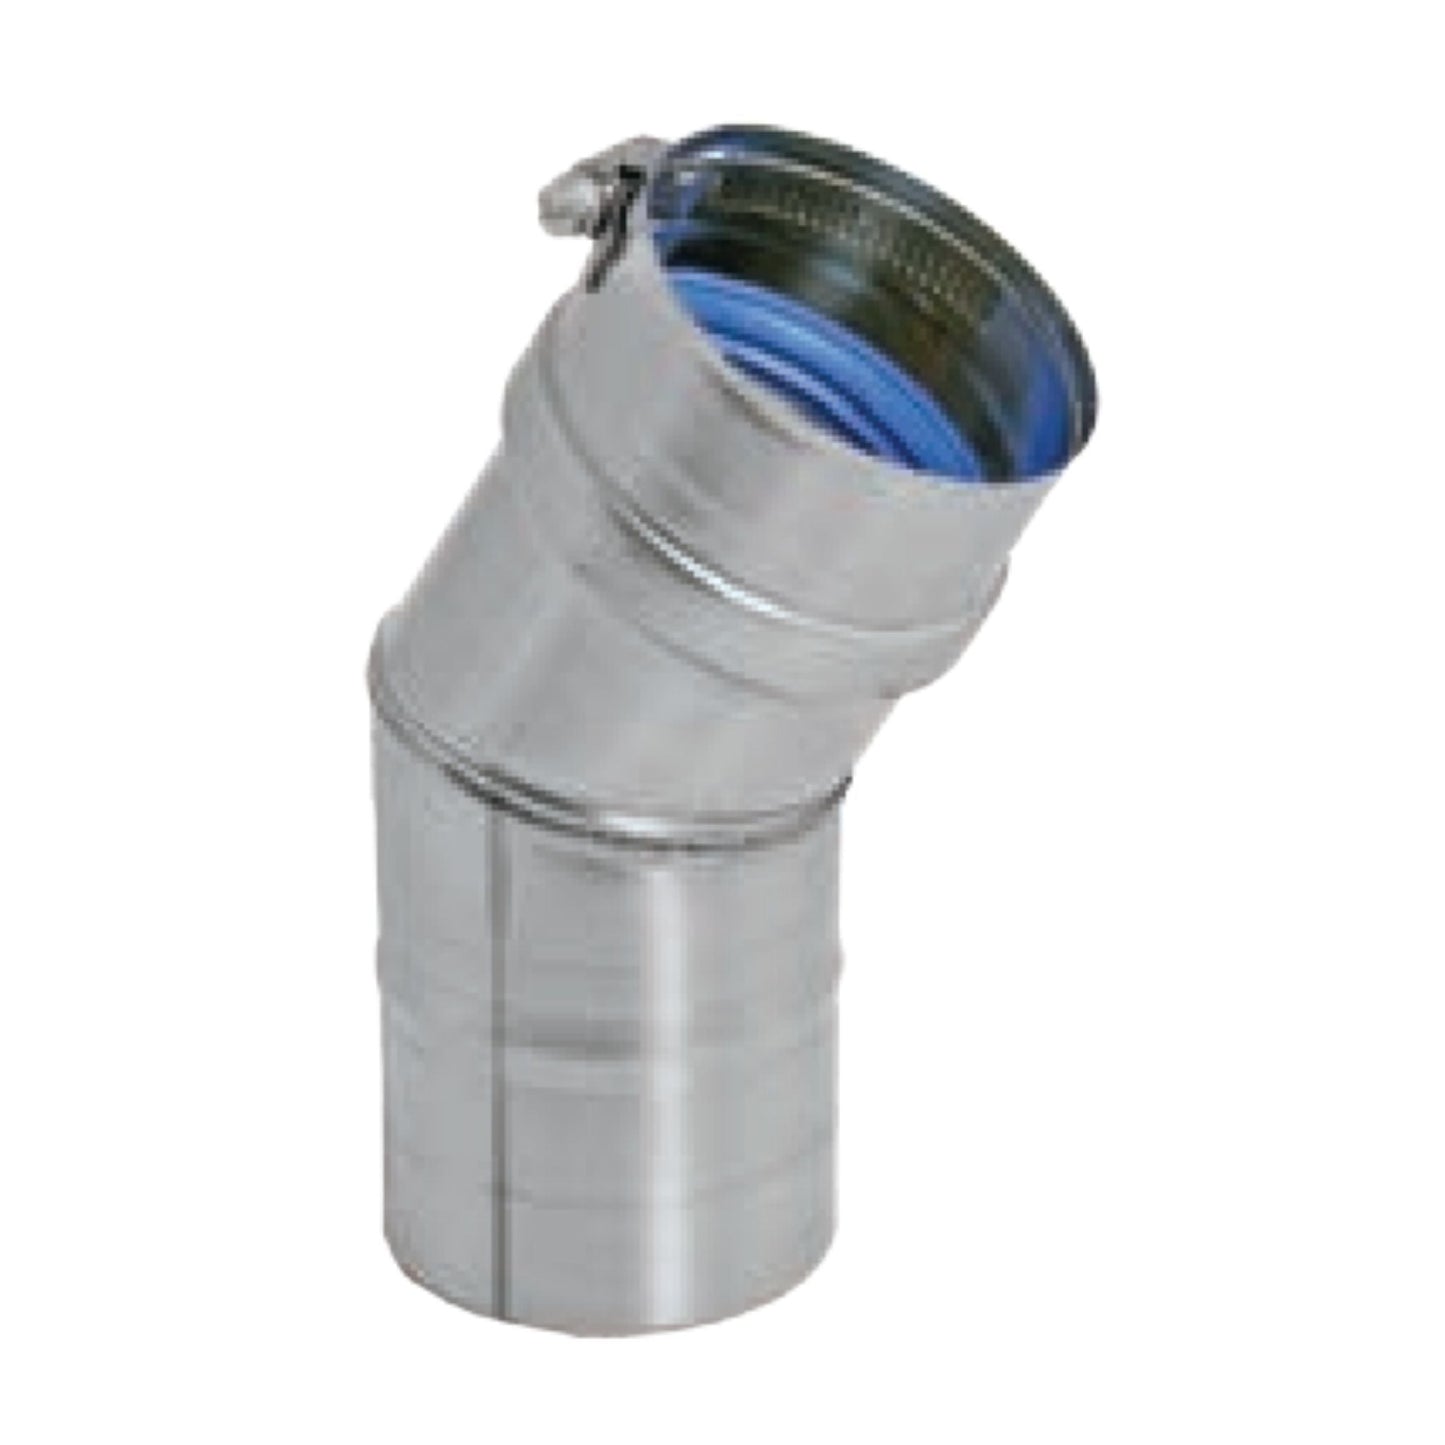 DuraVent FasNSeal 4" 30 Degree 29-4C Stainless Steel Elbow